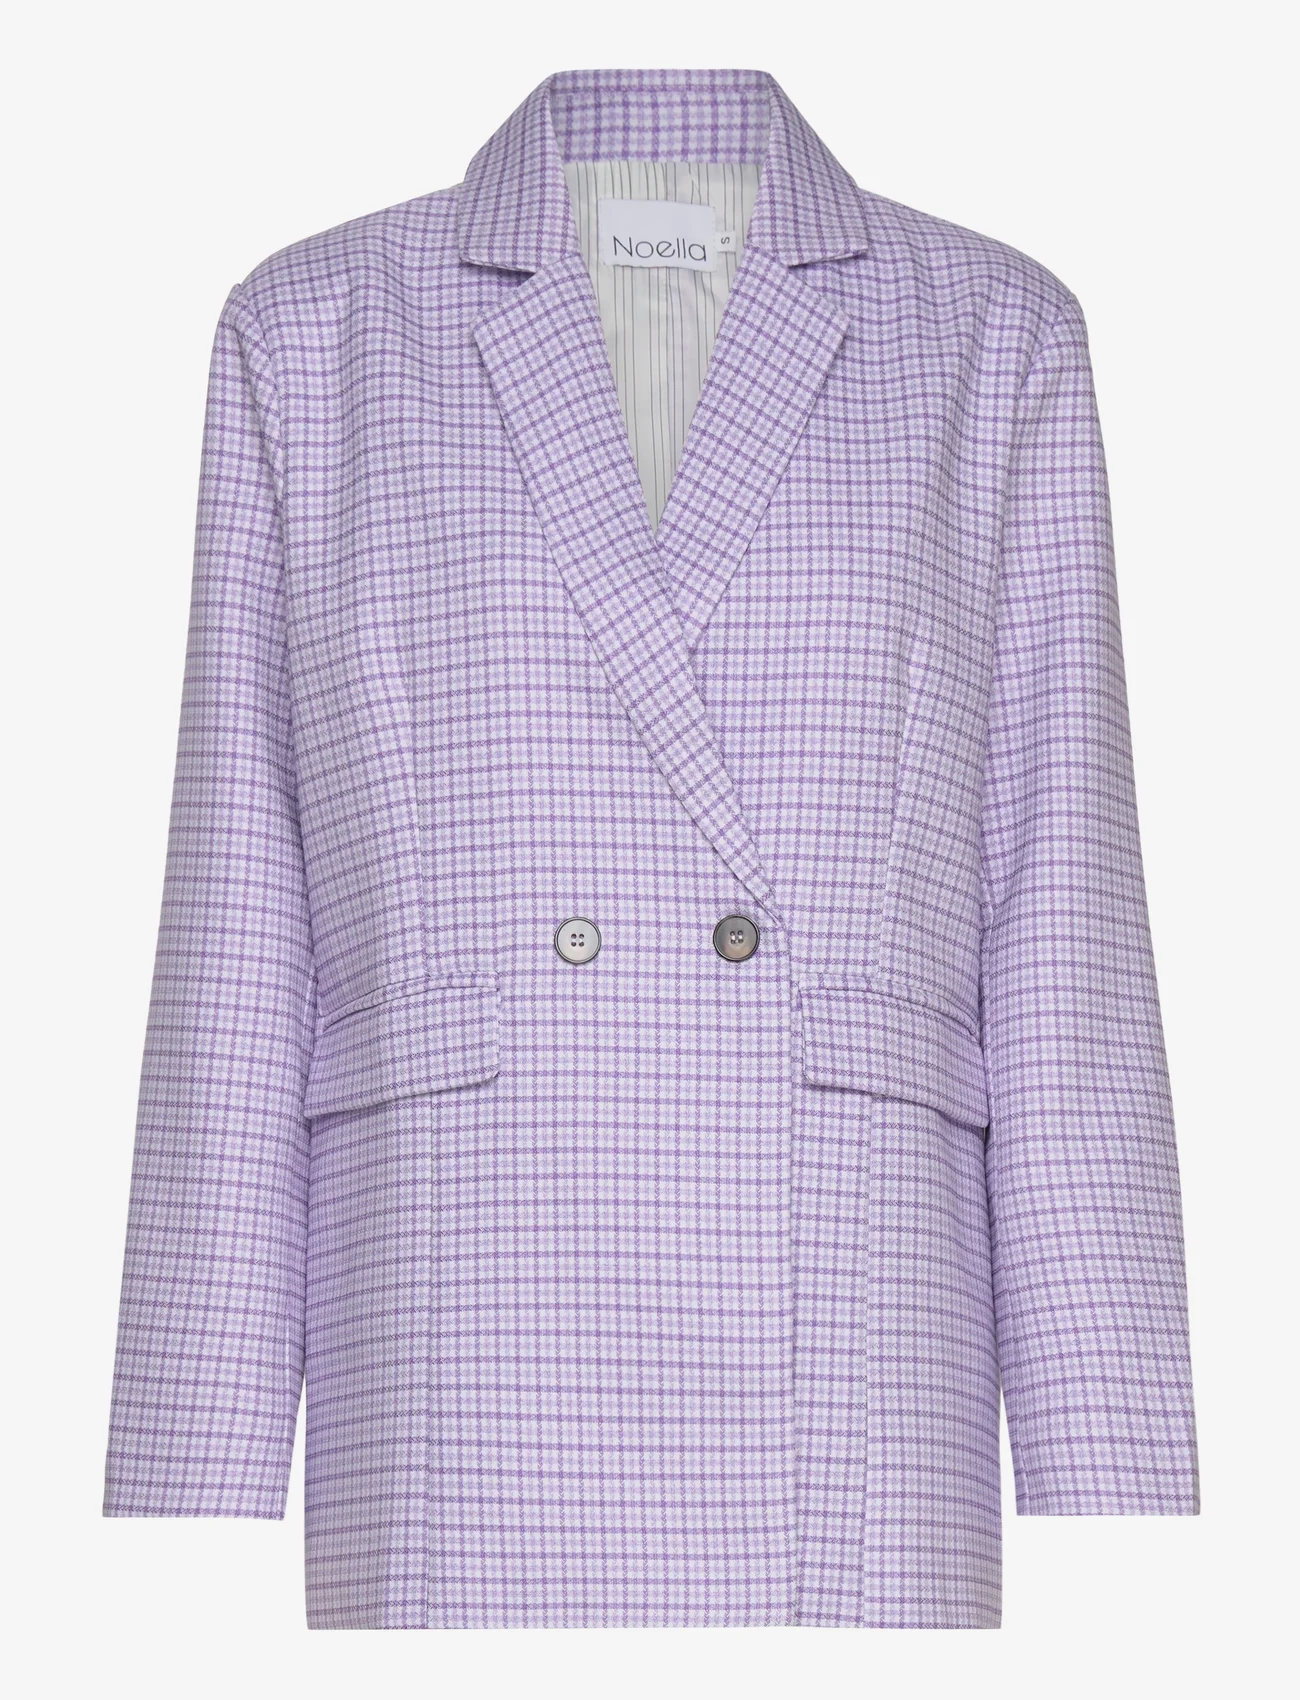 Noella - Mille Oversize Blazer - party wear at outlet prices - lavender check - 0